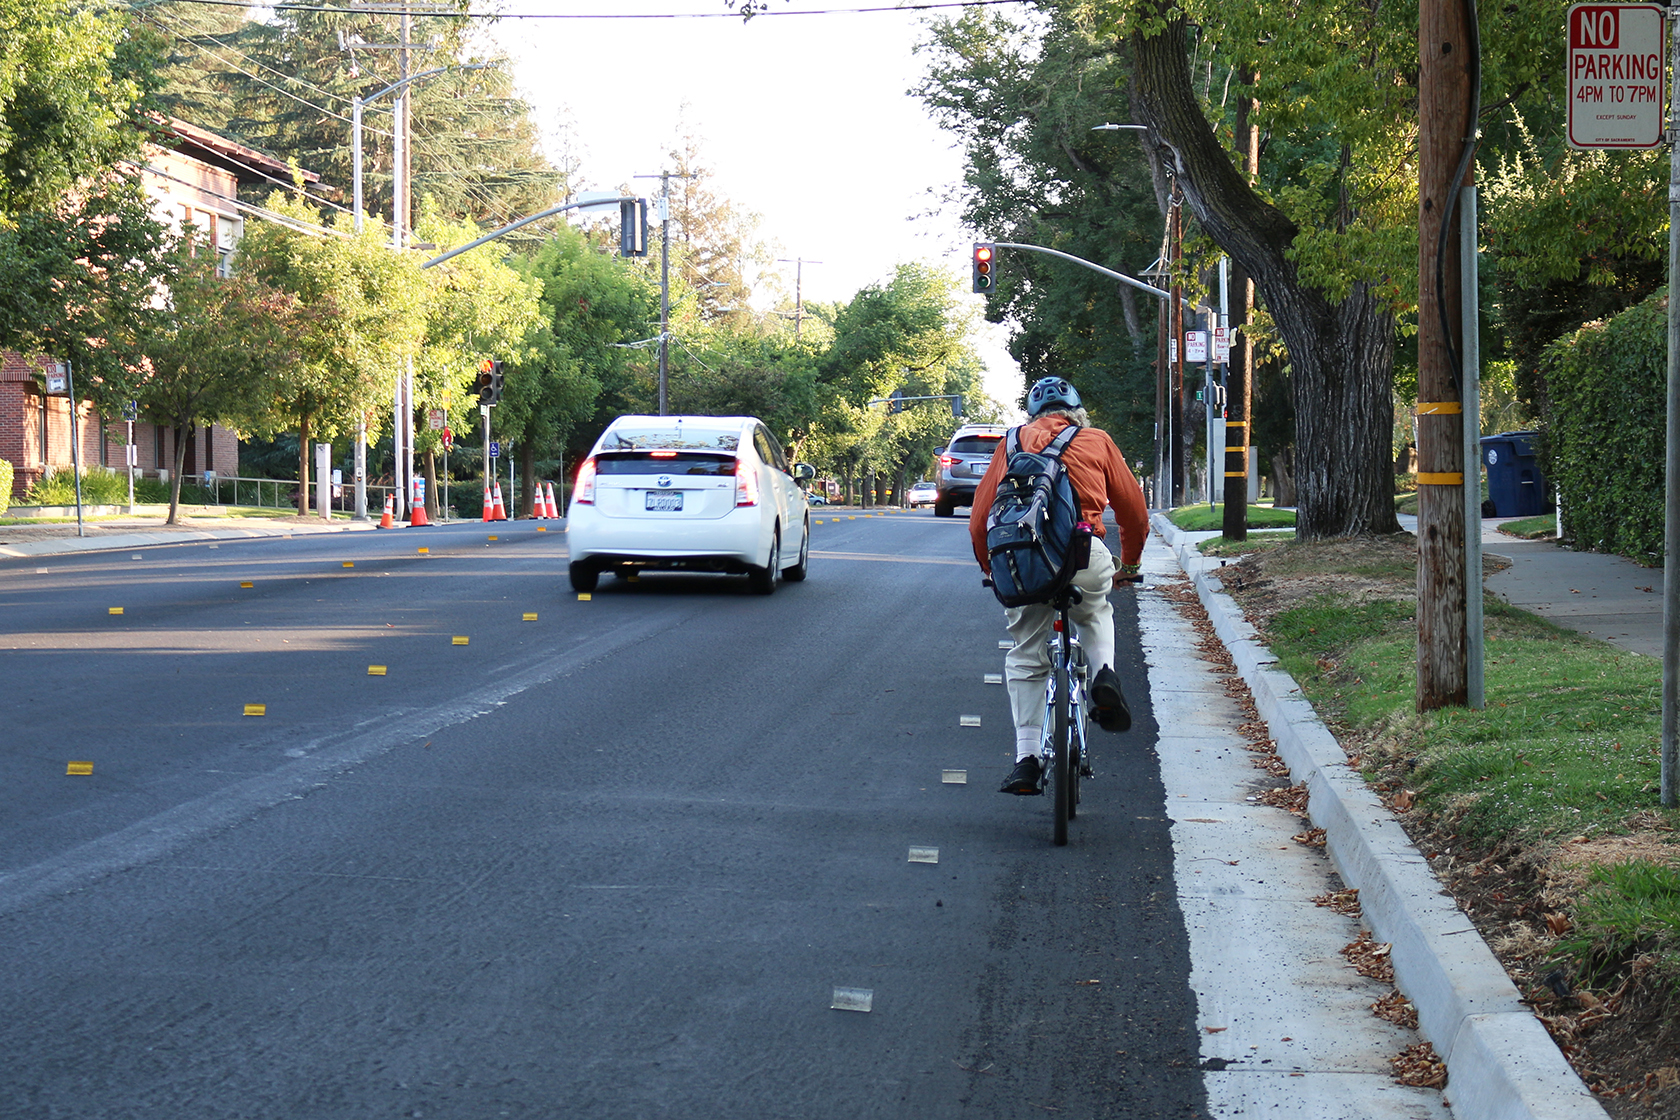 After a submission to Sacramento City Council in 2010 documenting dangerous riding conditions for bicyclists, a section of Freeport Blvd is being reduced to two-lane traffic to add space for bike lanes. Corey Browning | coreybrowningexpress@gmail.com | Staff Photographer